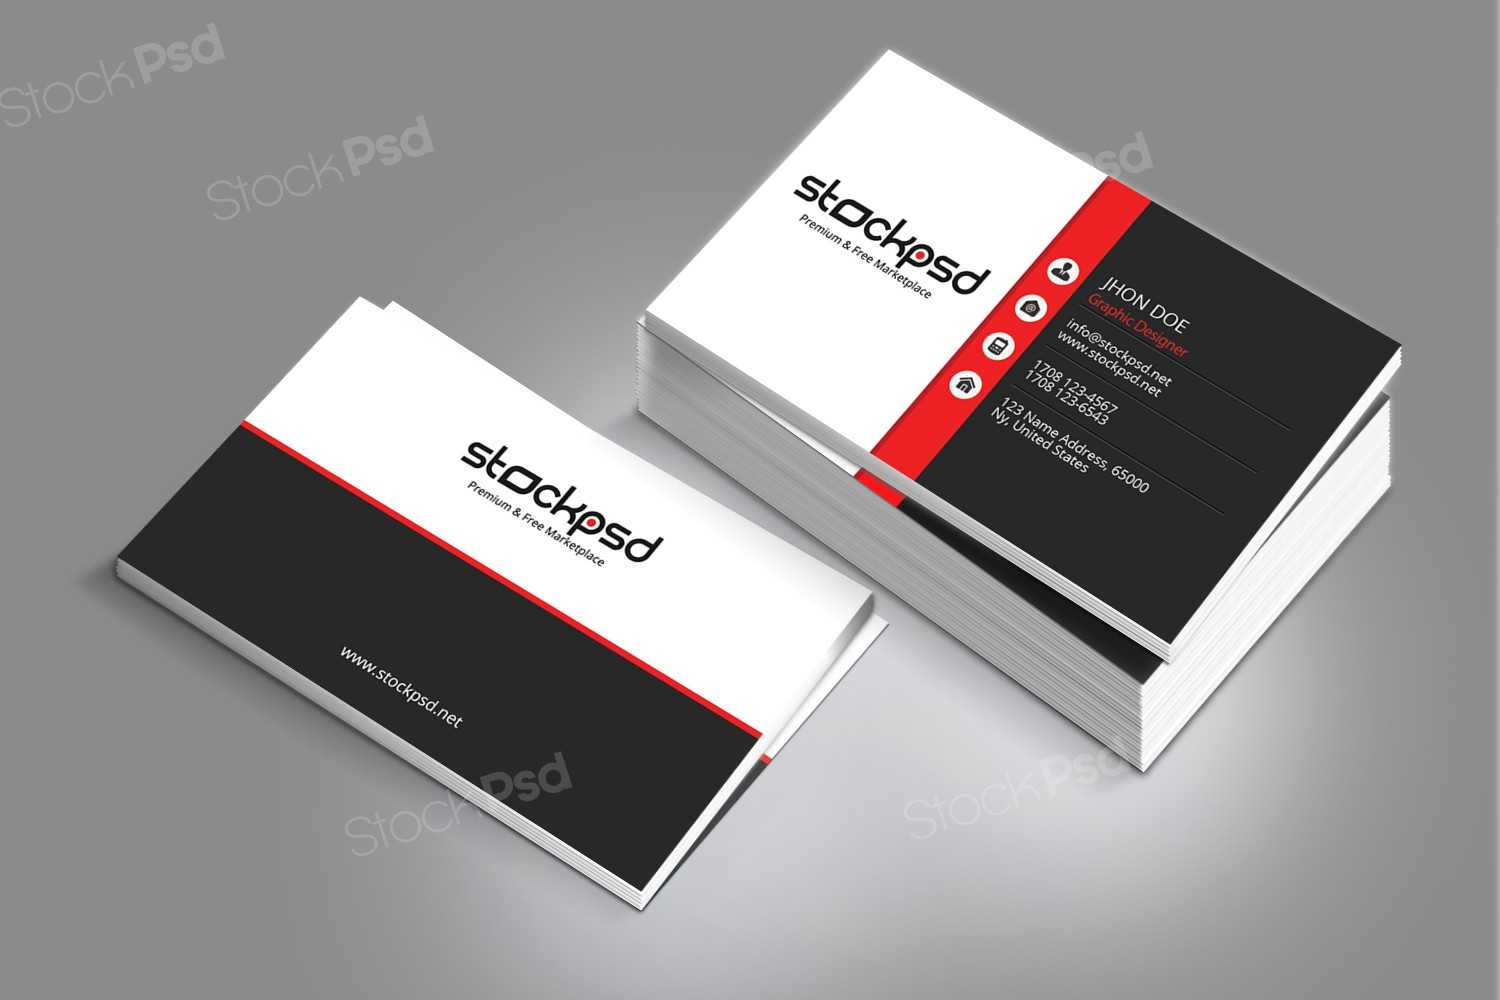 63Dbe4 Photoshop Template Business Card | Wiring Resources 2019 Pertaining To Free Personal Business Card Templates